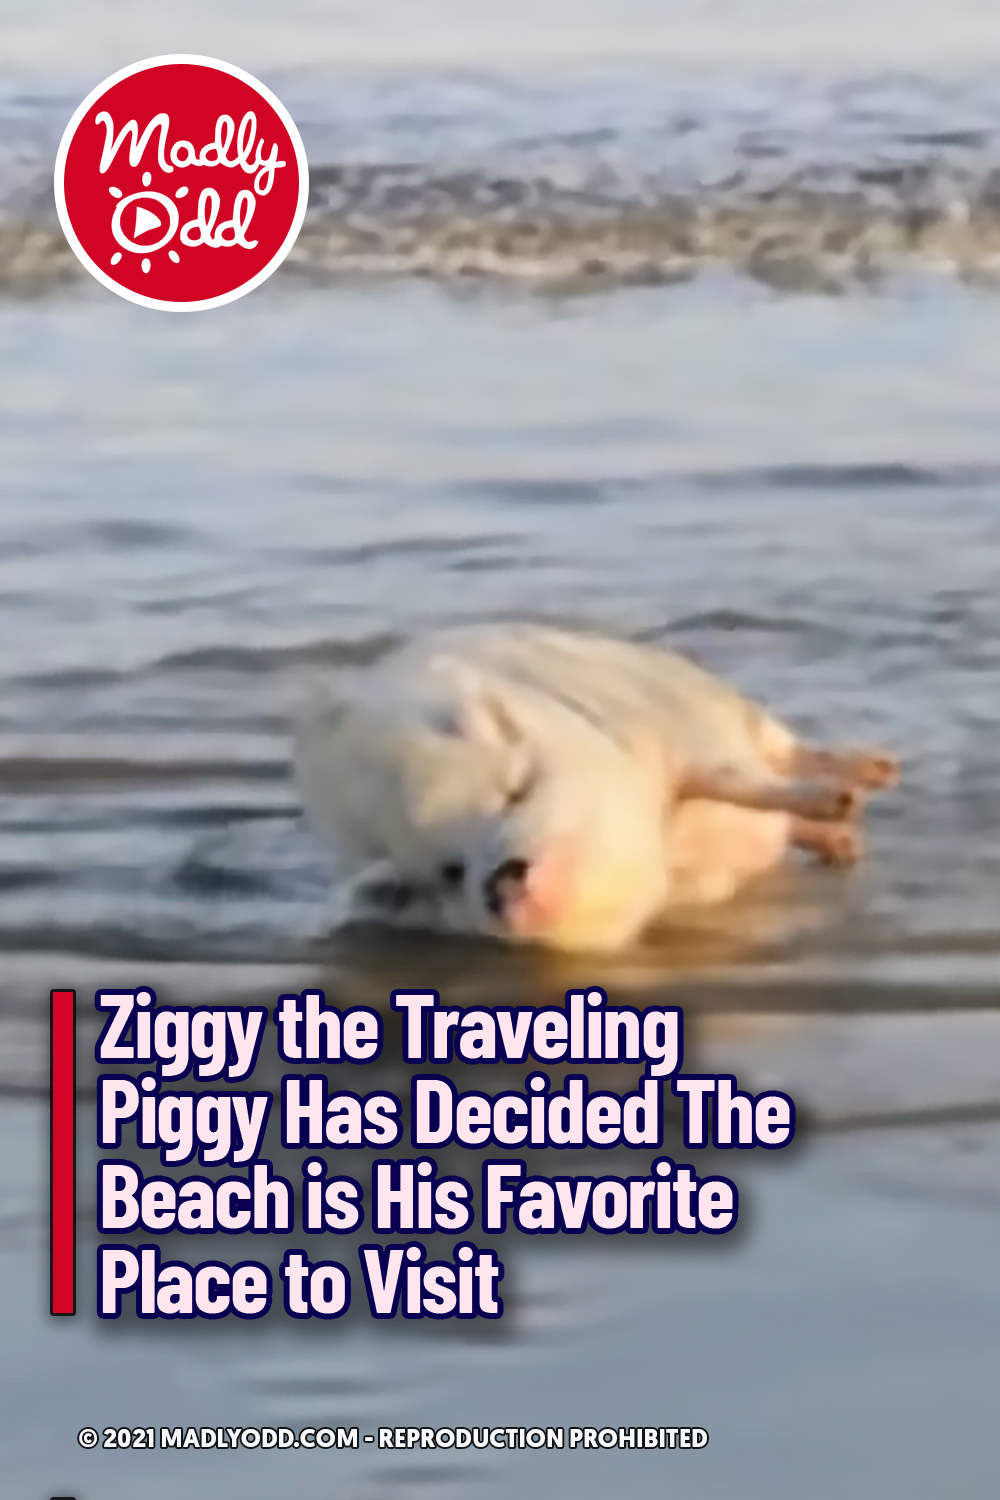 Ziggy the Traveling Piggy Has Decided The Beach is His Favorite Place to Visit